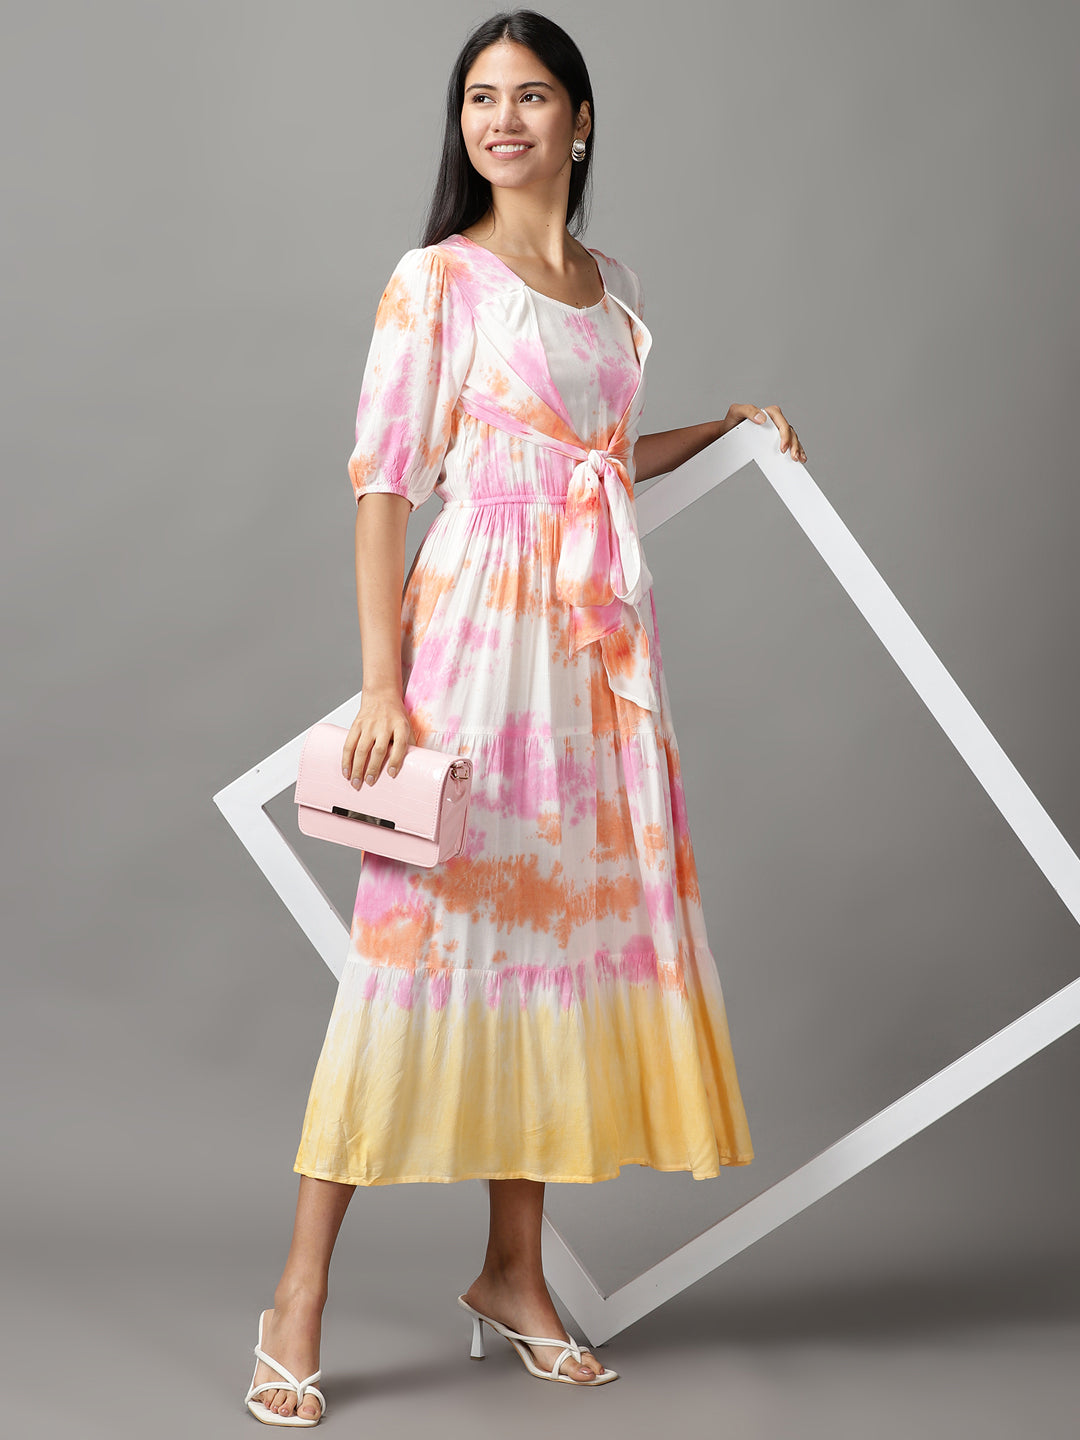 Women's White Tie Dye Fit and Flare Dress